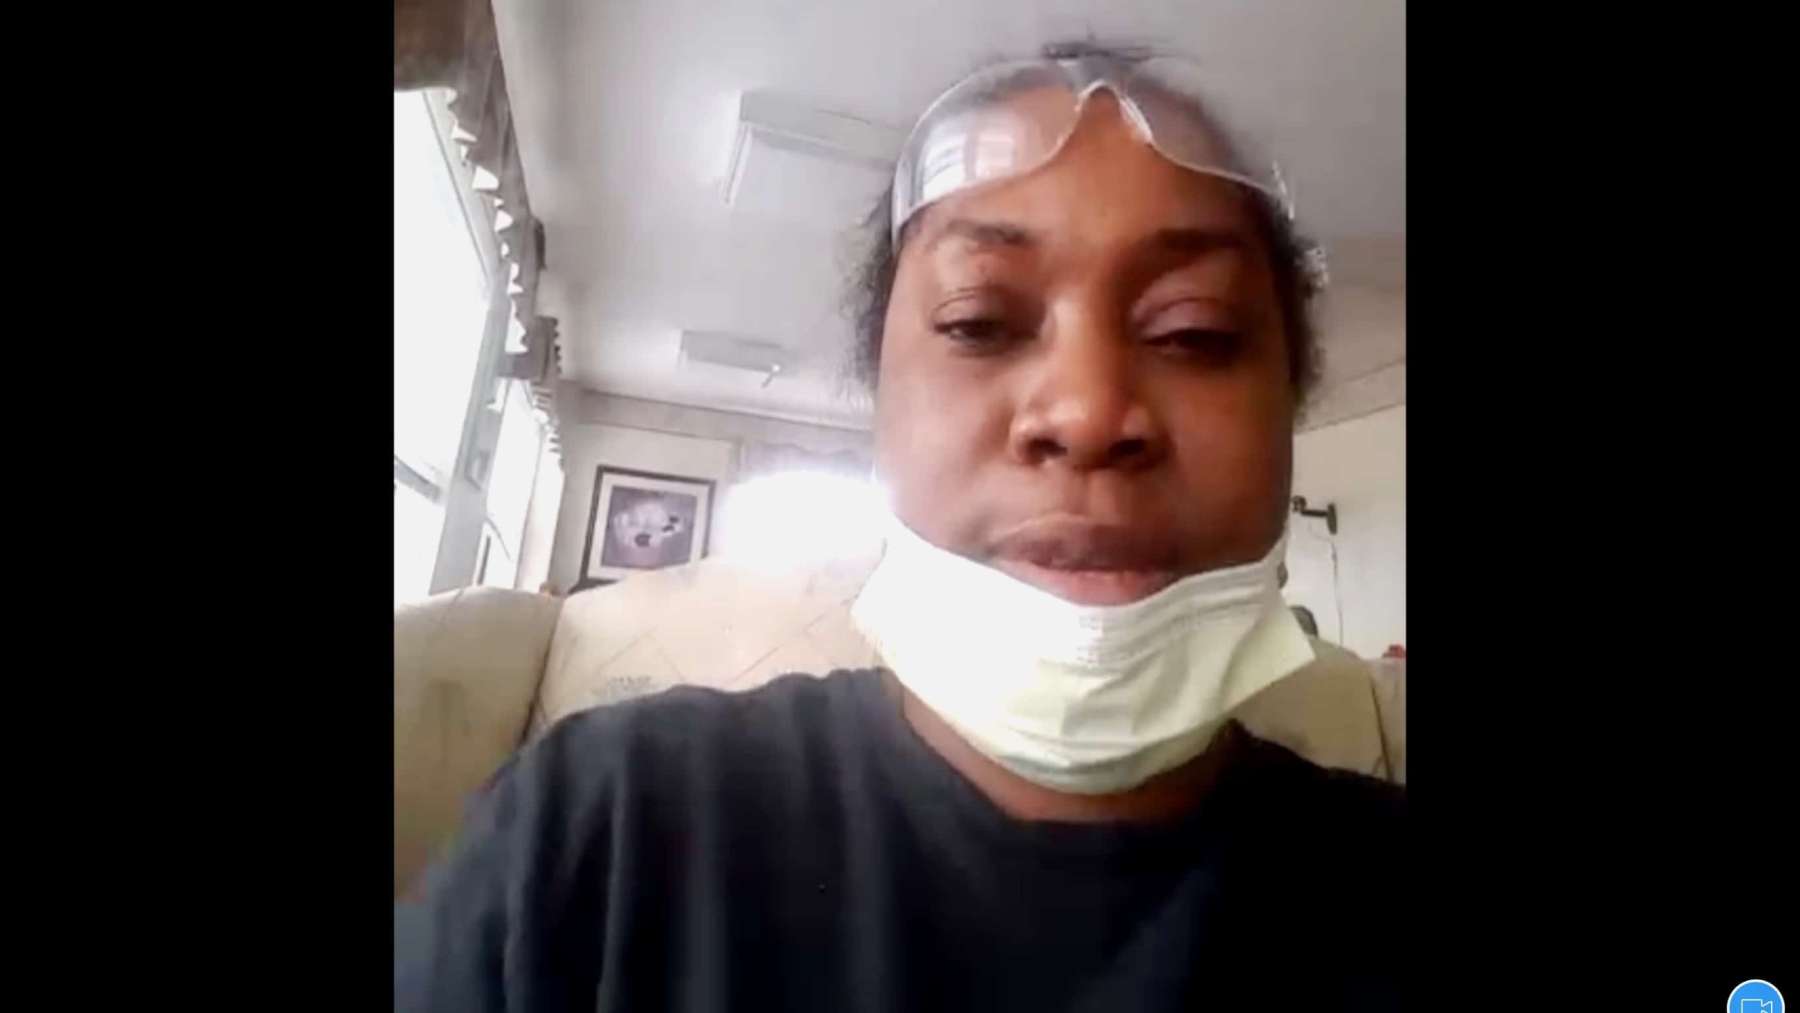 Rhode Island News: Aletha Browne on the lack of pay, staffing and PPE she endures as a CNA during the COVID-19 pandemic